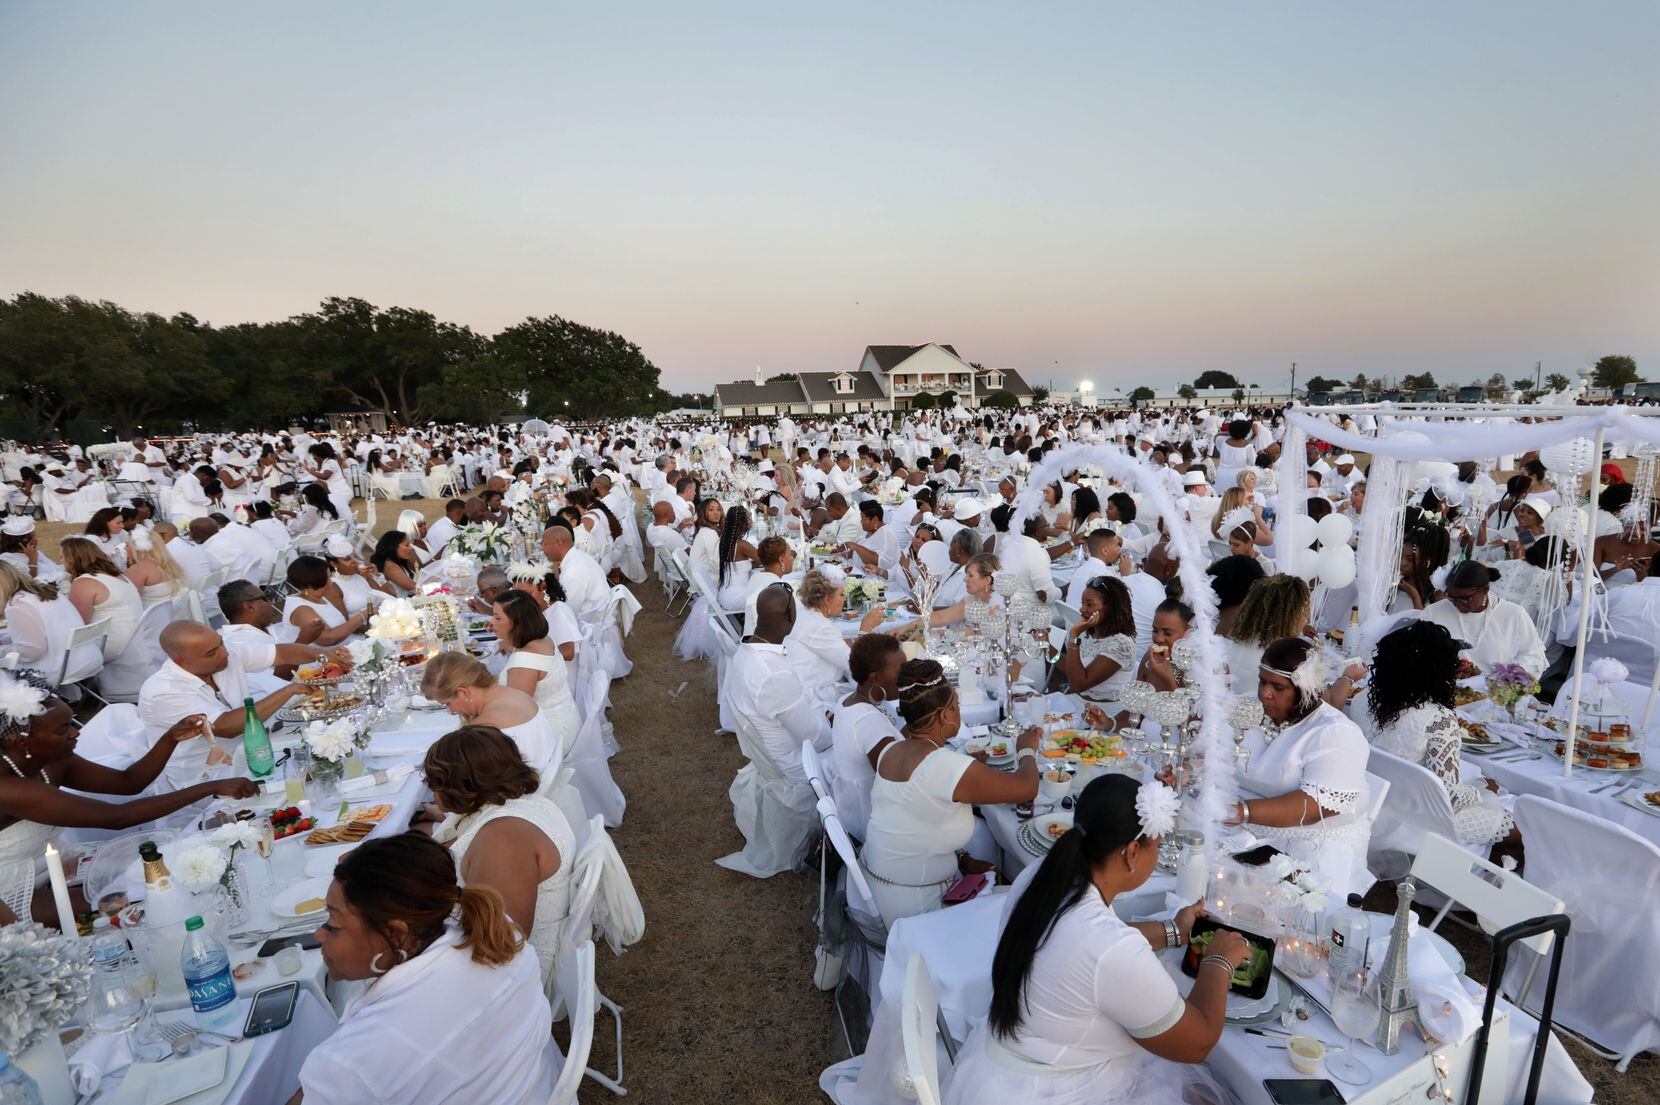 The Diner en Blanc event at Southfork Ranch in Parker, TX, on Oct. 5, 2019. (Jason Janik/Special Contributor)